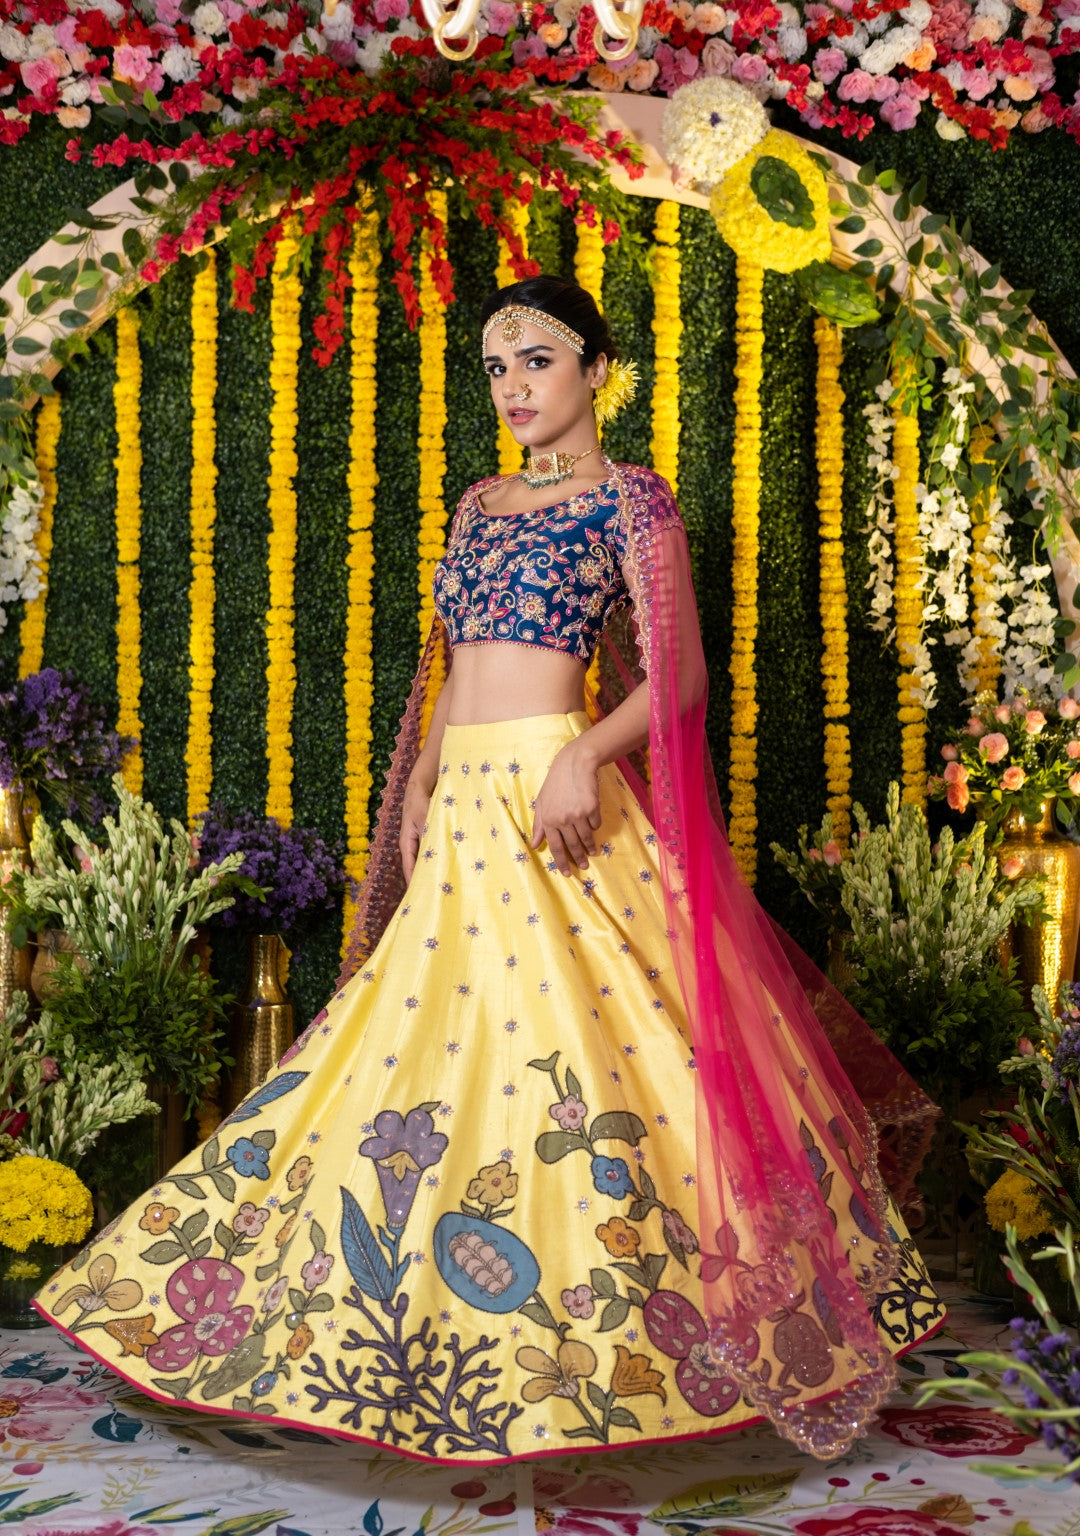 Buy Little Shoppe Dark Pink & Yellow Lehenga with Embraided Floral Blouse  (6-7 Years) at Amazon.in